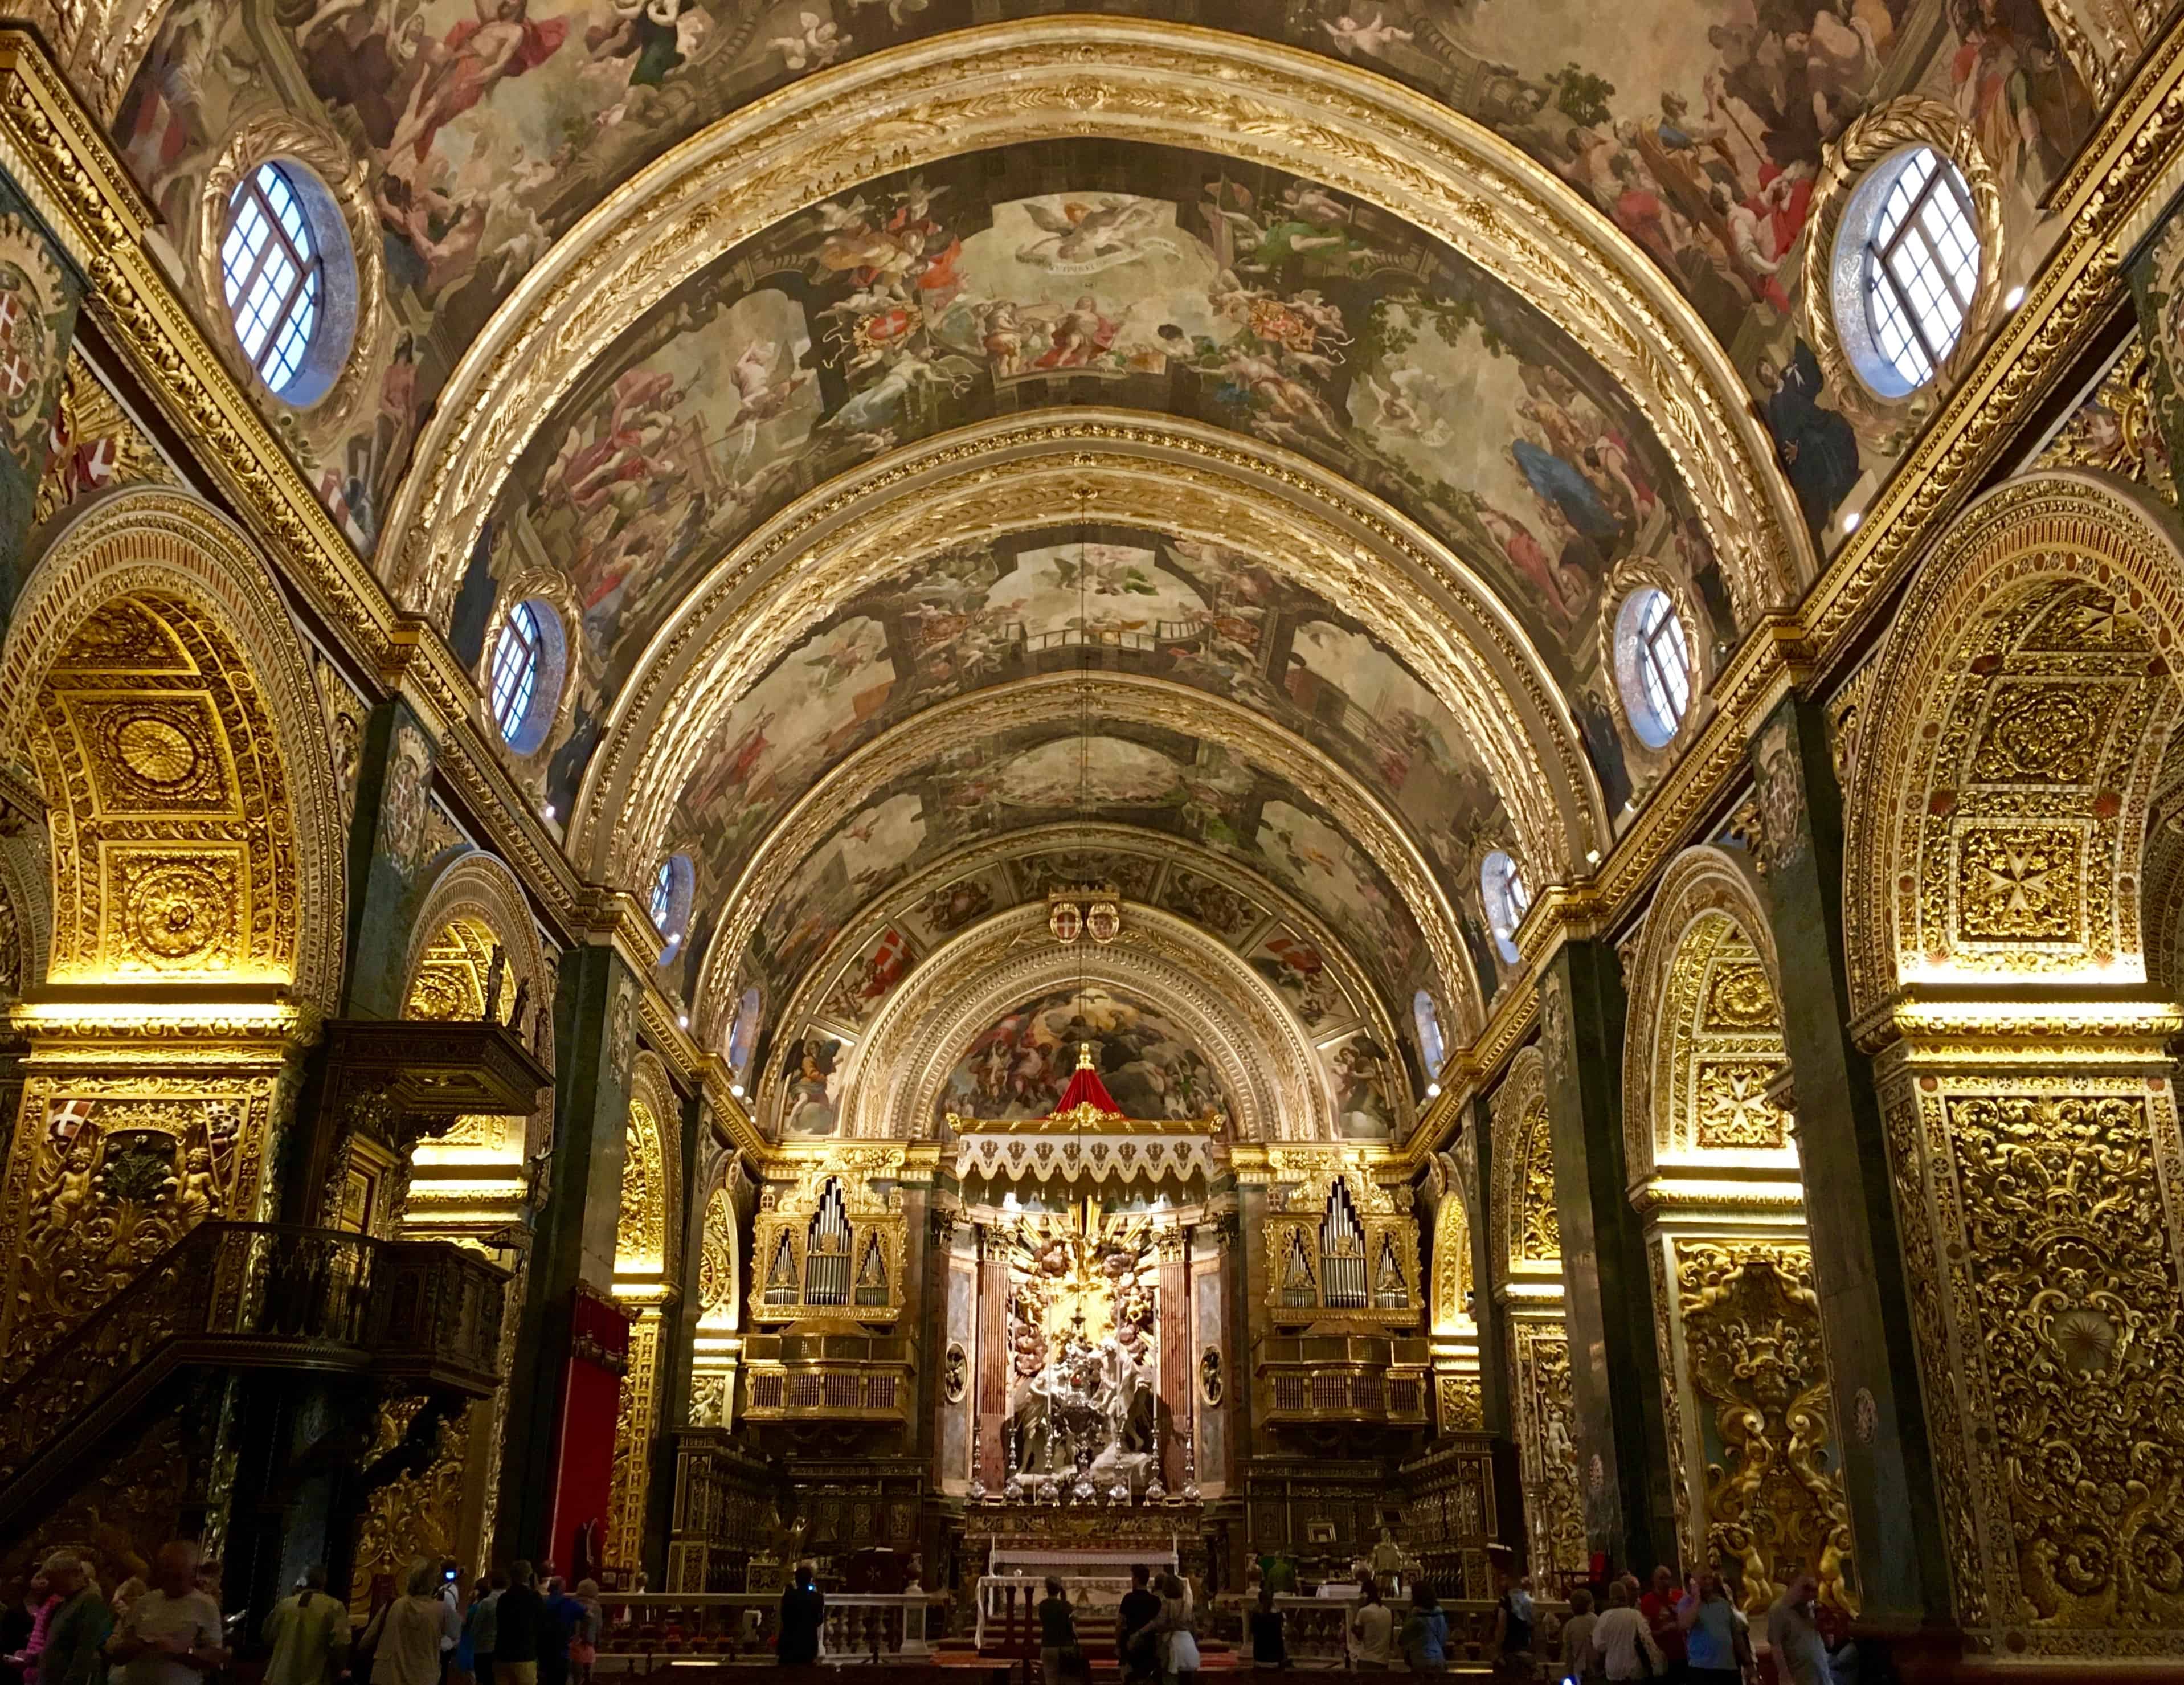 The high Baroque interior of Saint John's Co-Cathedral in Valetta